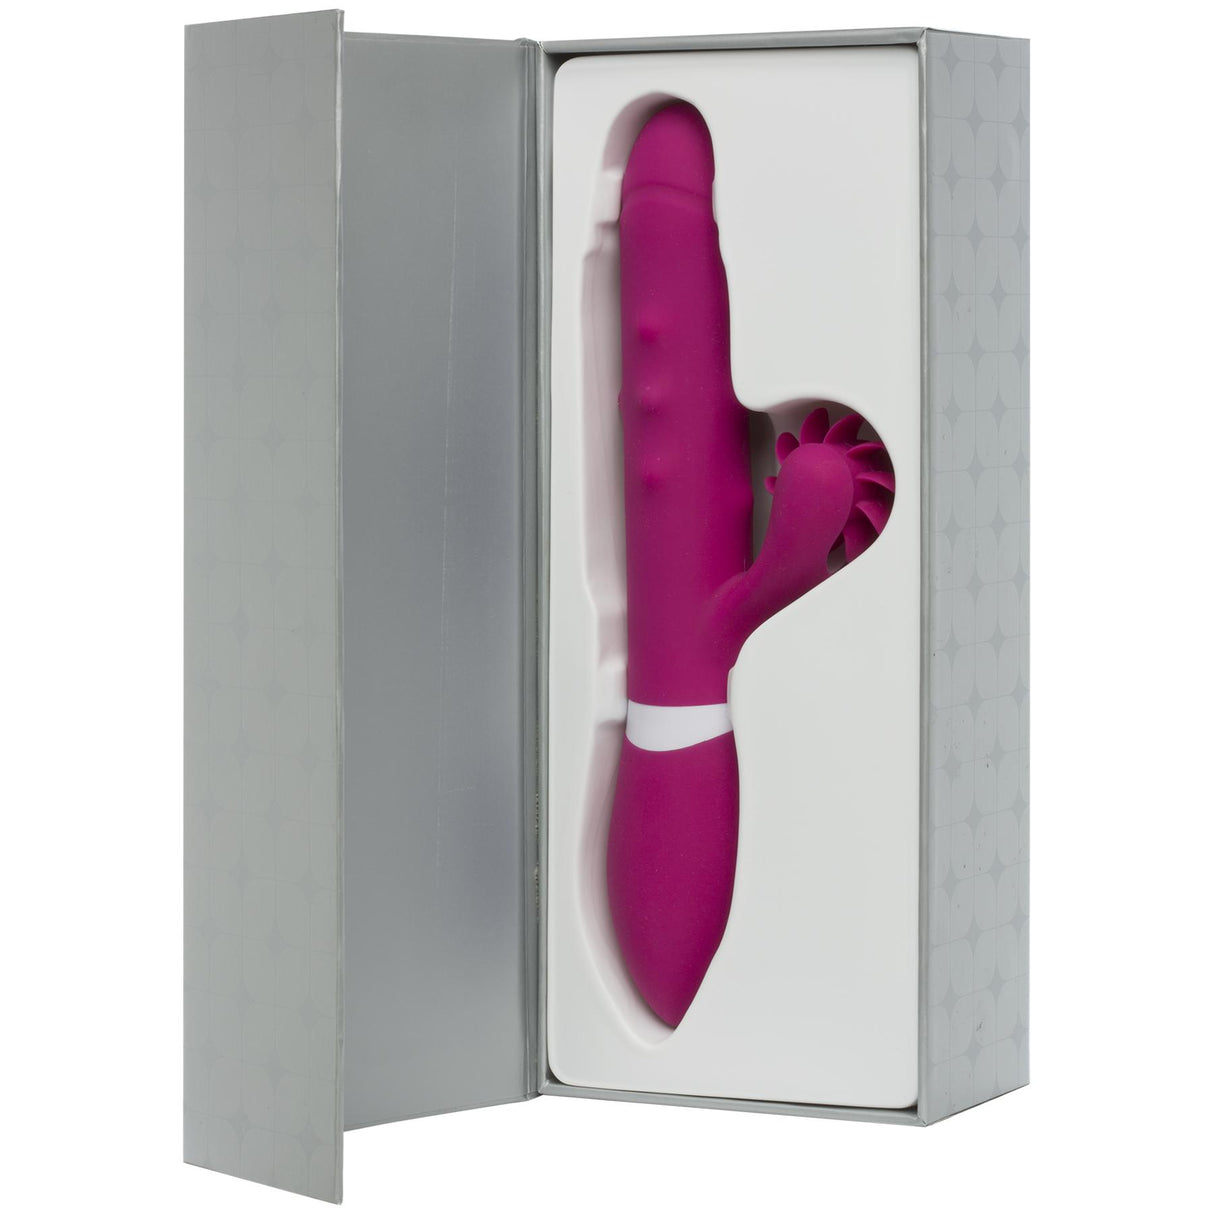 iVibe Select iRoll Rechargeable Rabbit Dildo